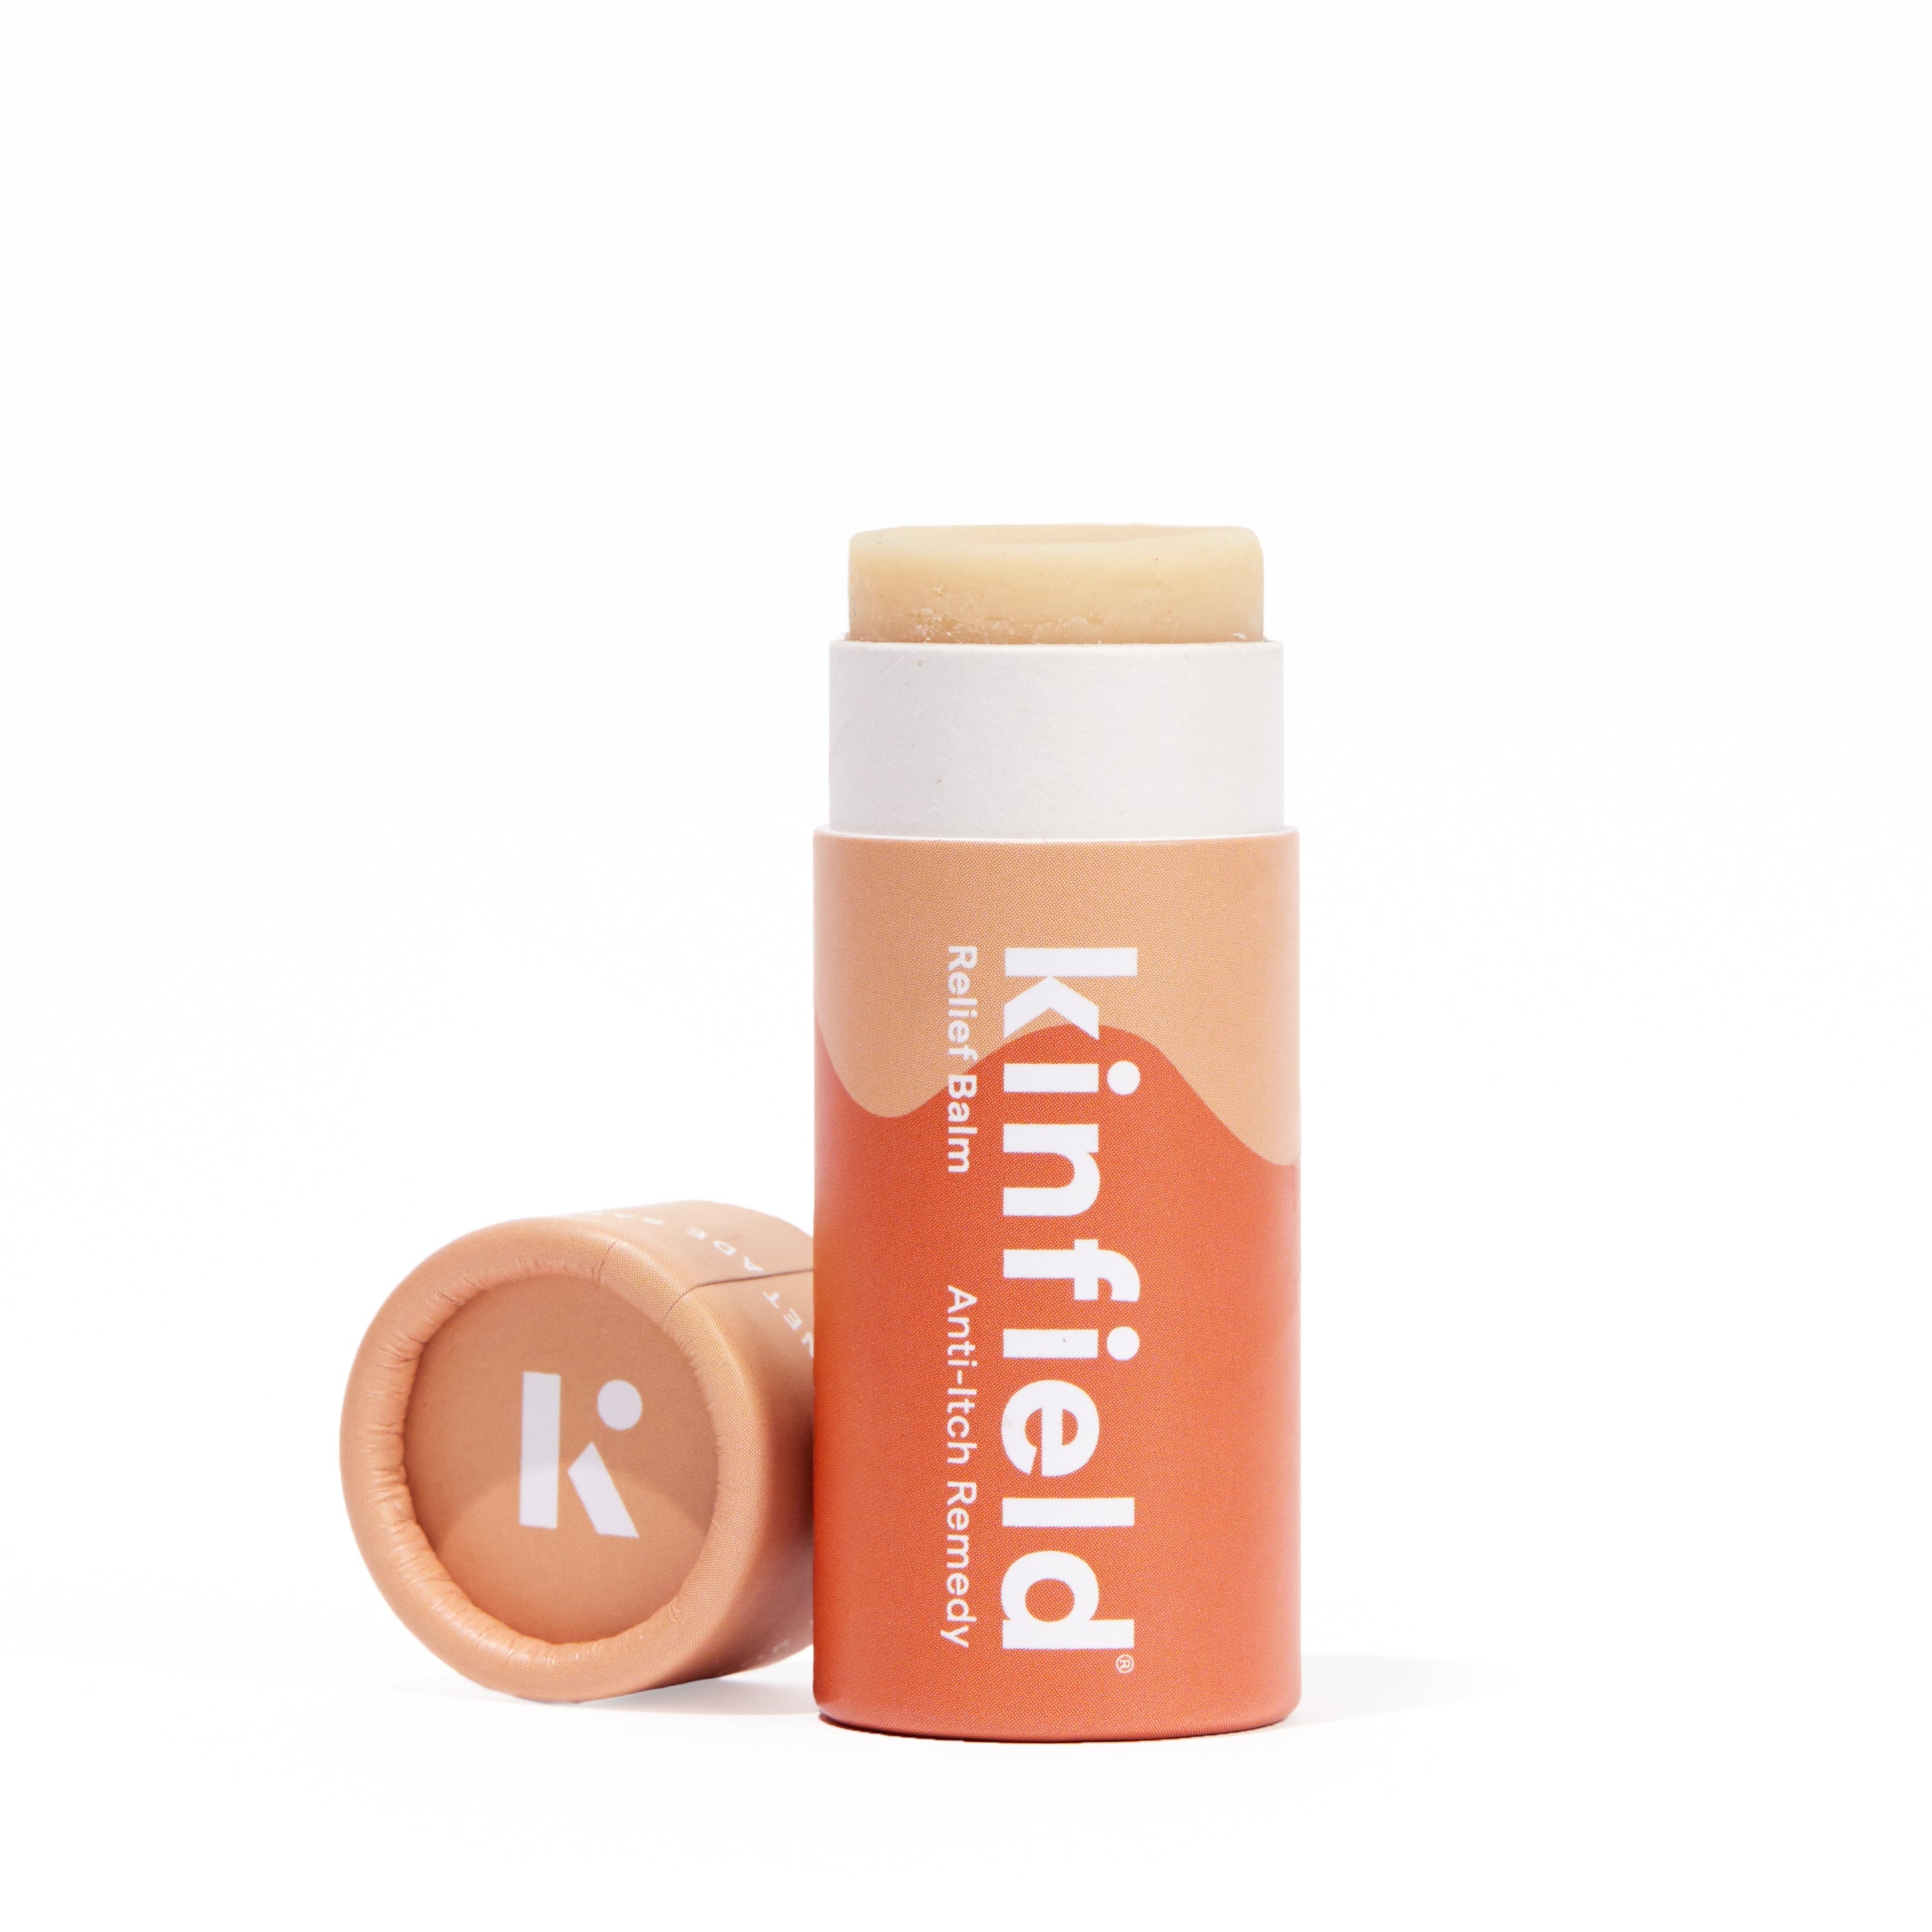 Kinfield | Relief Balm, Personal Care, Kinfield, Defiance Outdoor Gear Co.